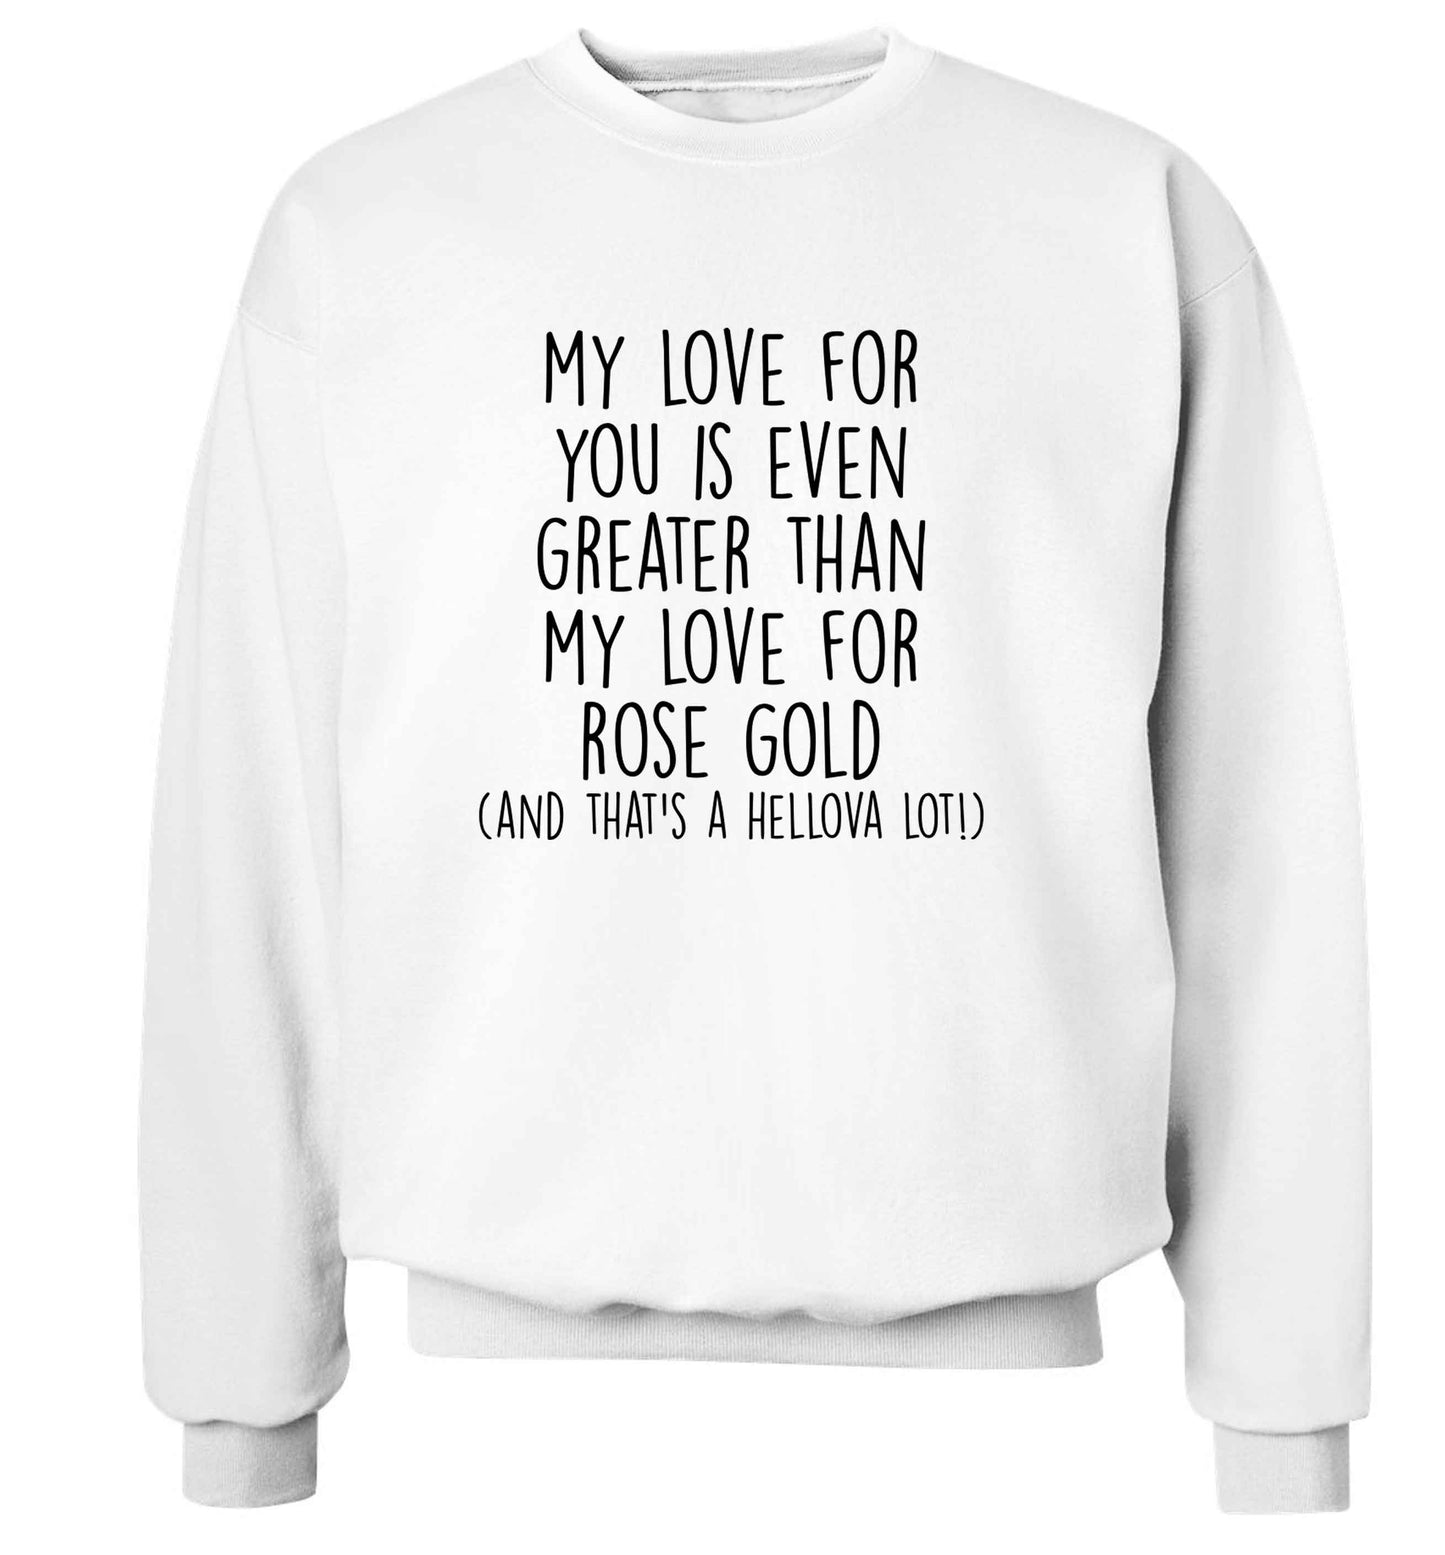 My love for you is even greater than my love for rose gold (and that's a hellova lot) adult's unisex white sweater 2XL